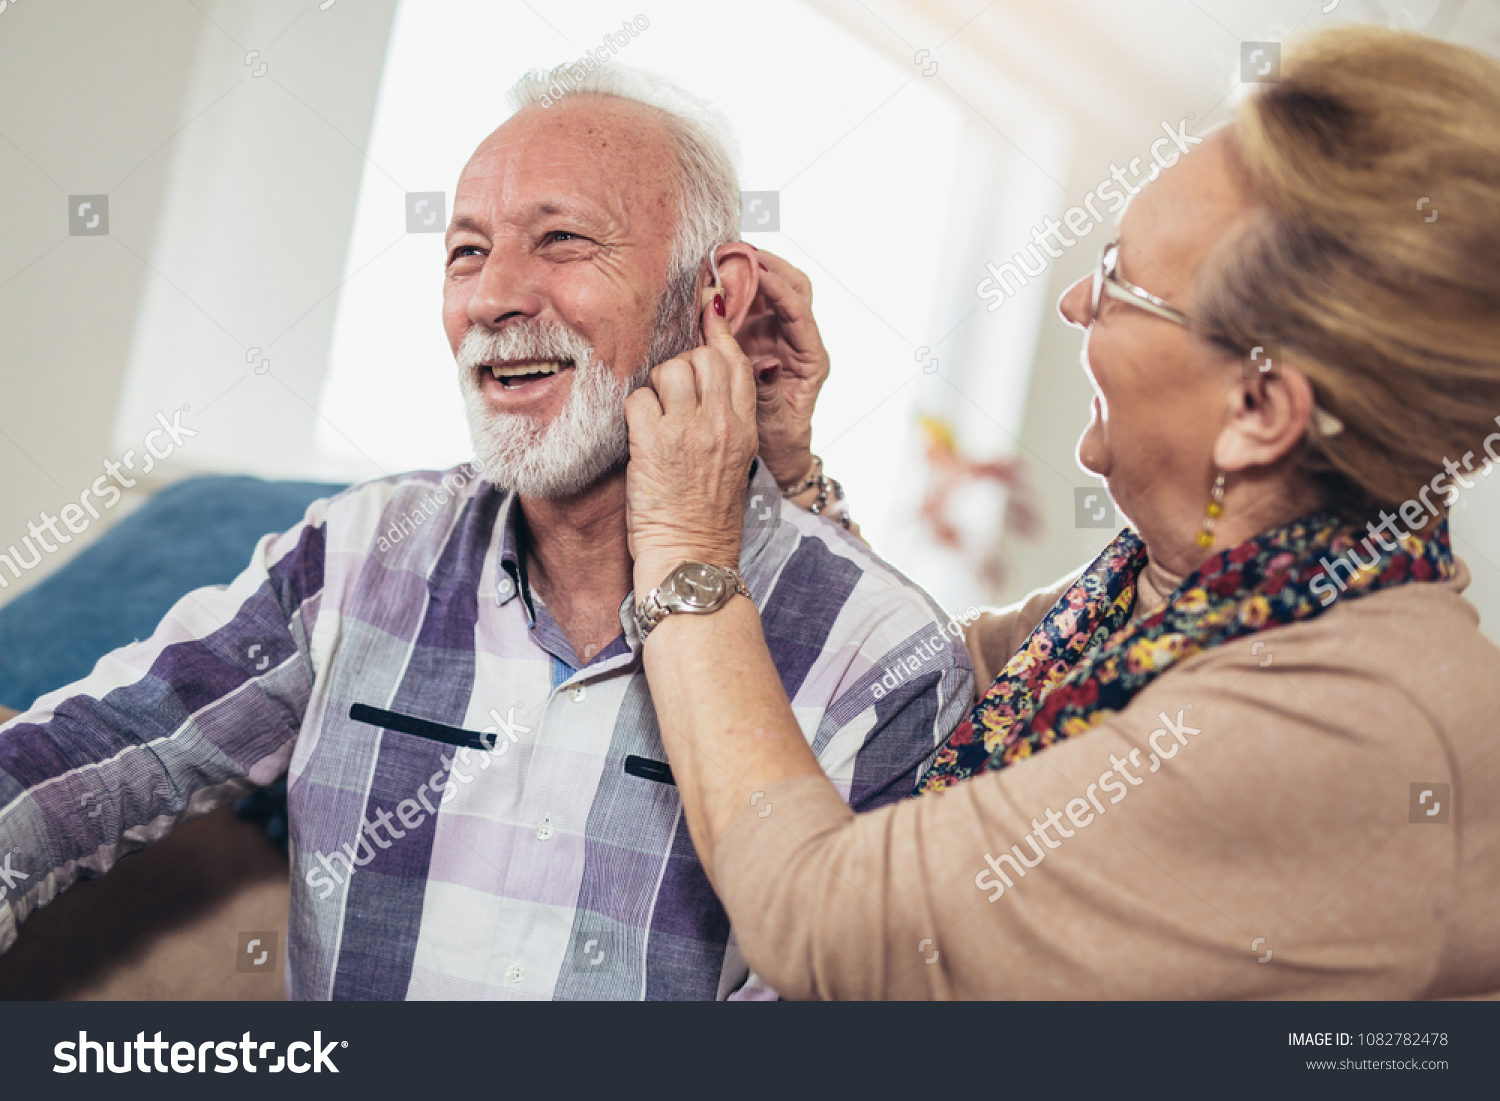 Older man and woman or pensioners with a hearing problem #1082782478